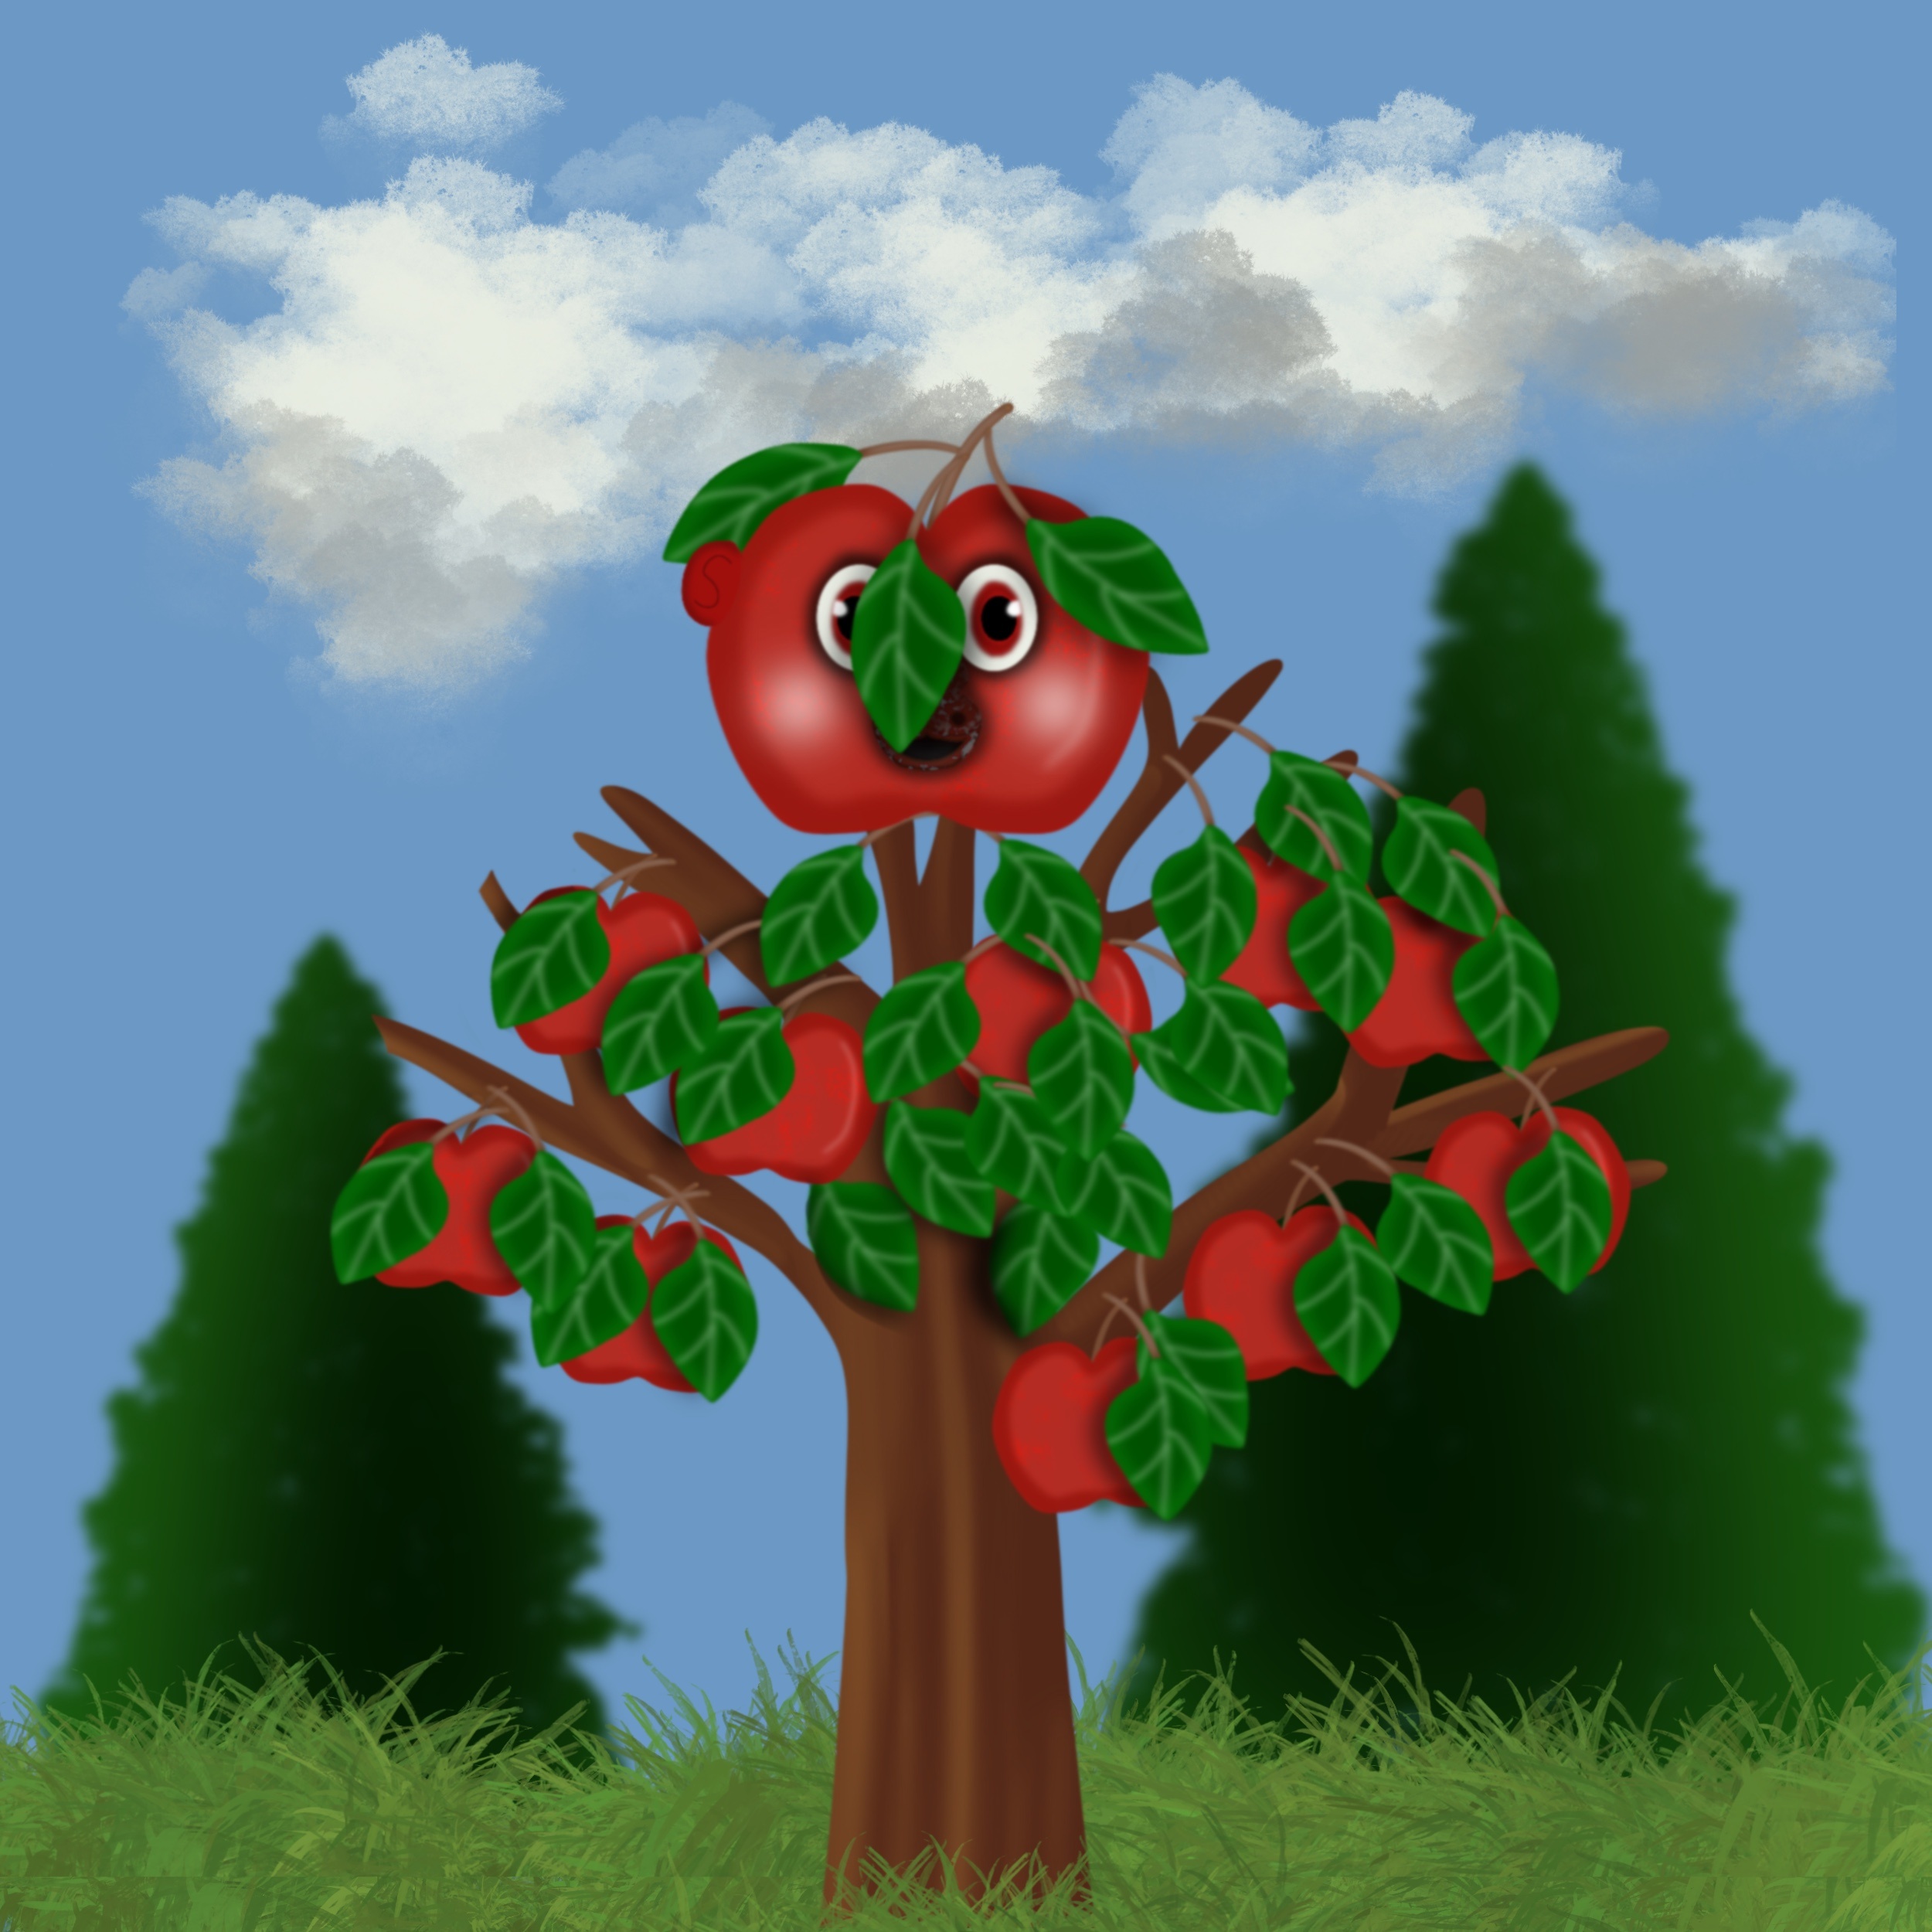 A. Tree (A is for Apple)